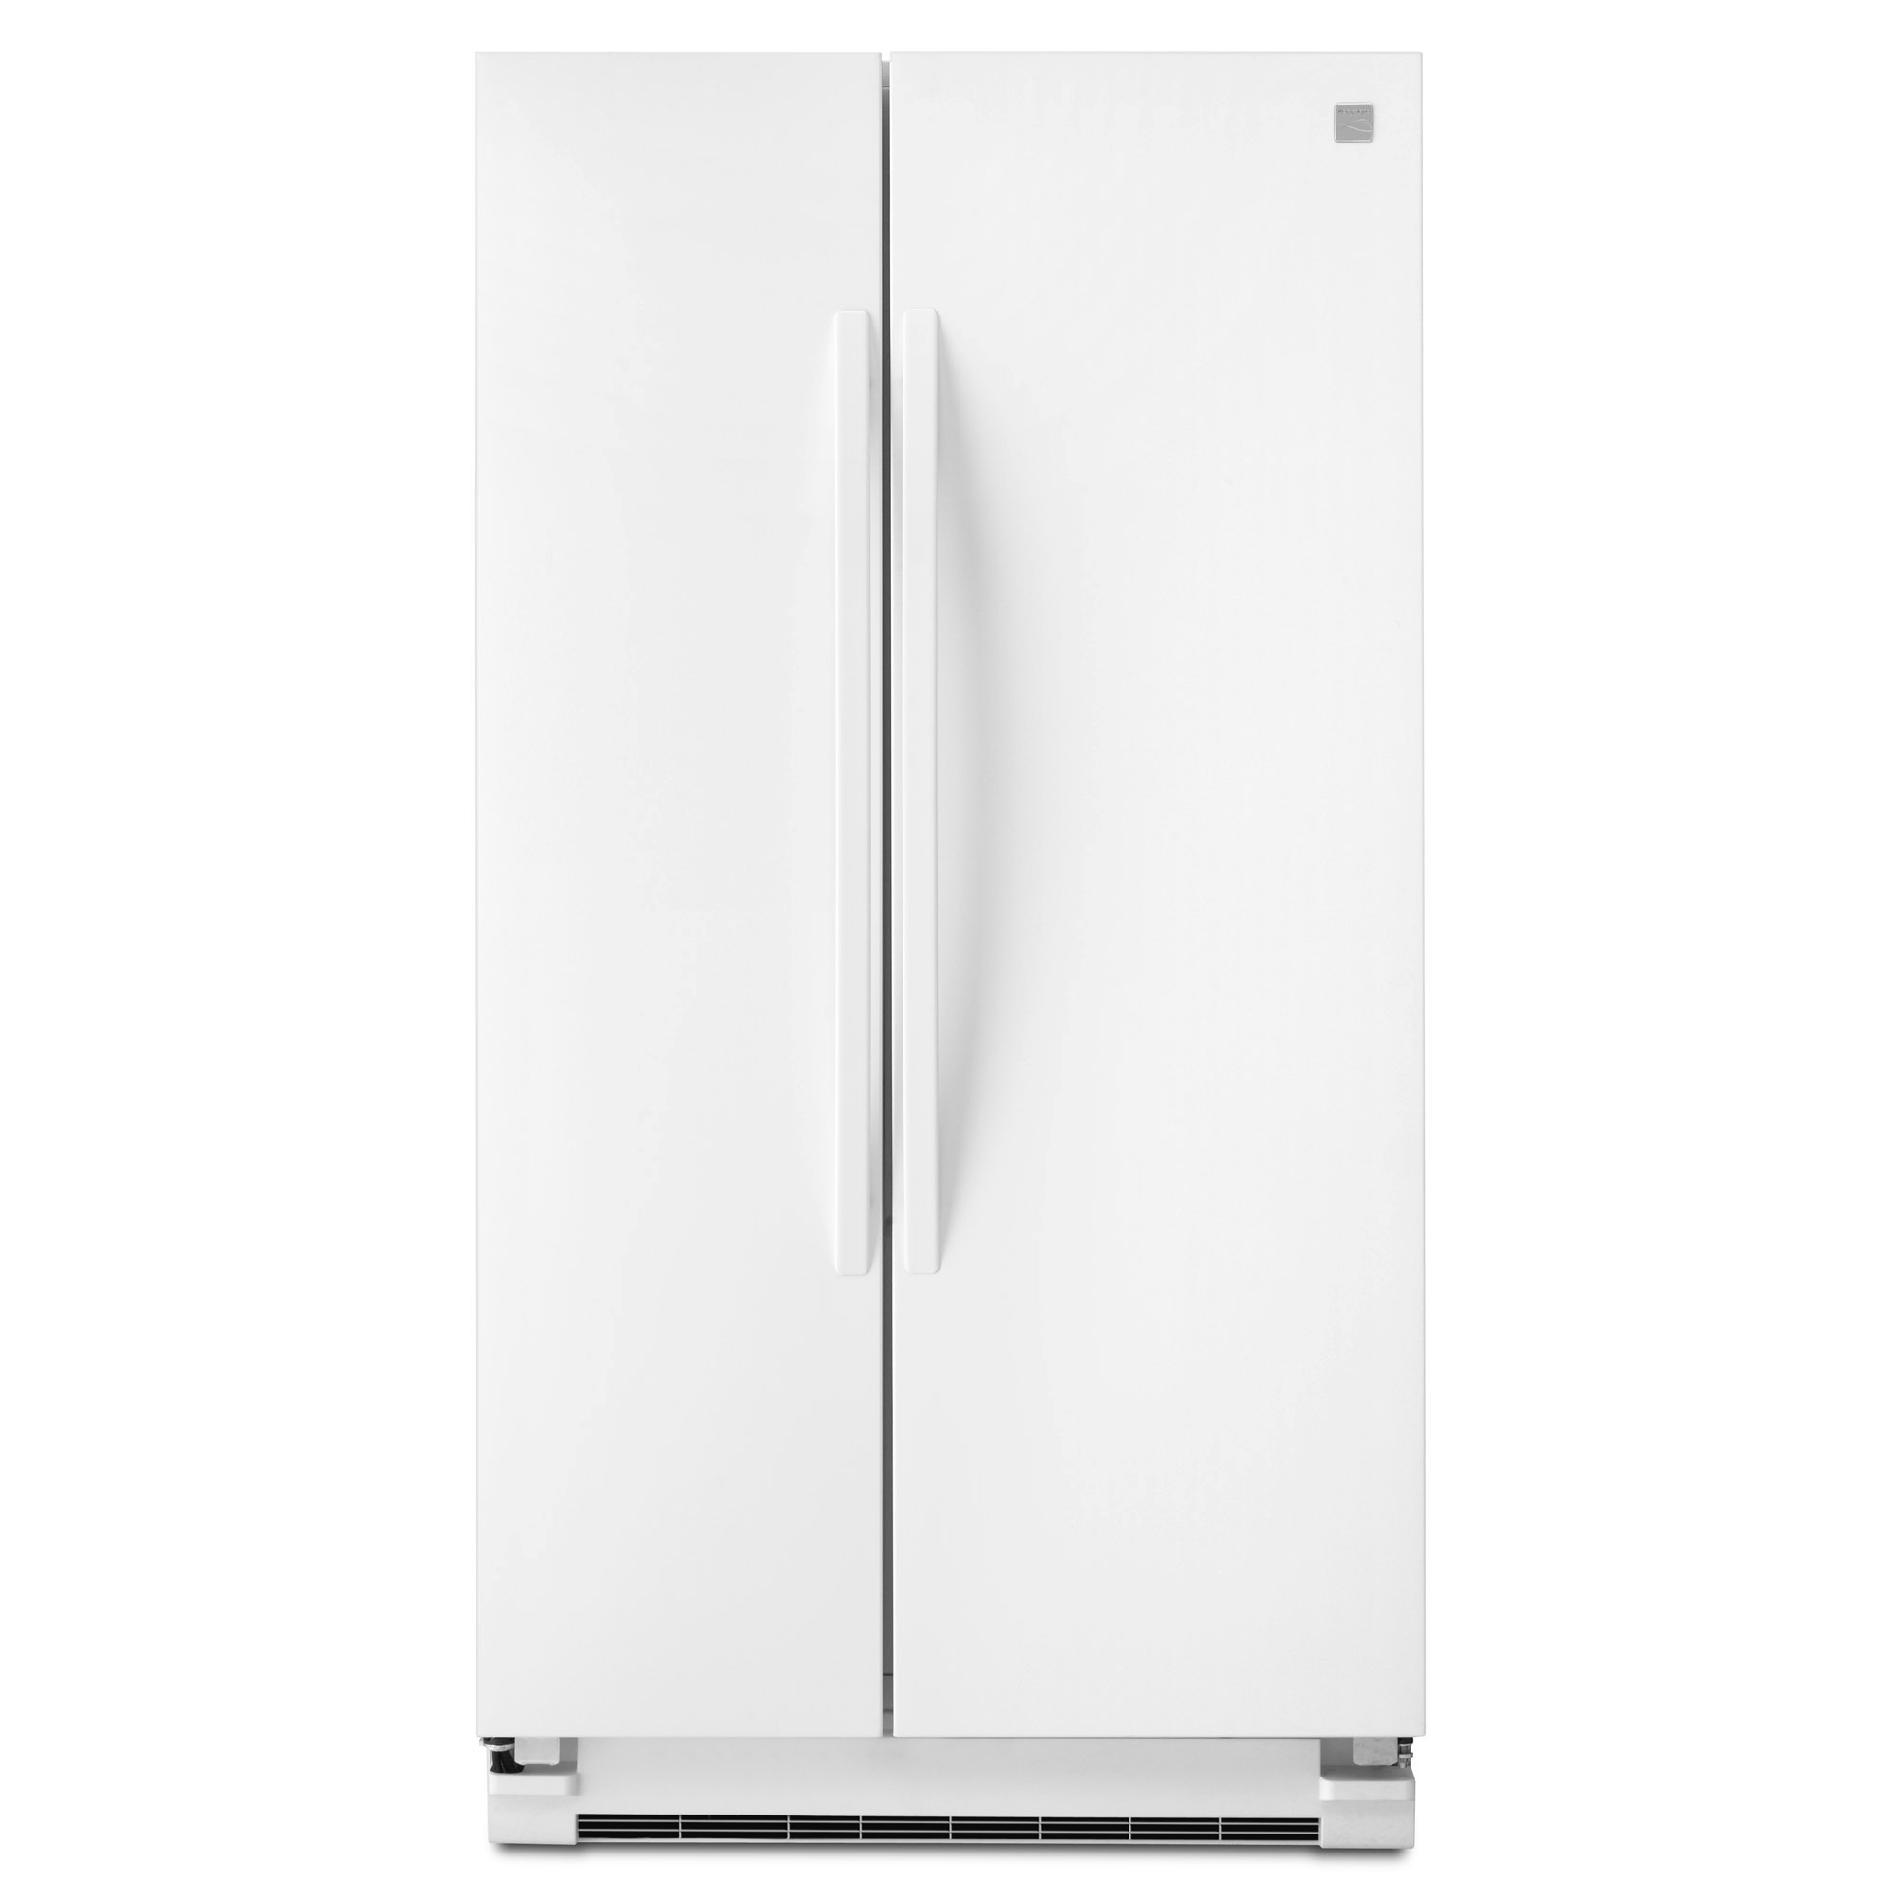 UPC 883049265698 product image for 25 cu. ft. Side-by-Side Refrigerator - White | upcitemdb.com